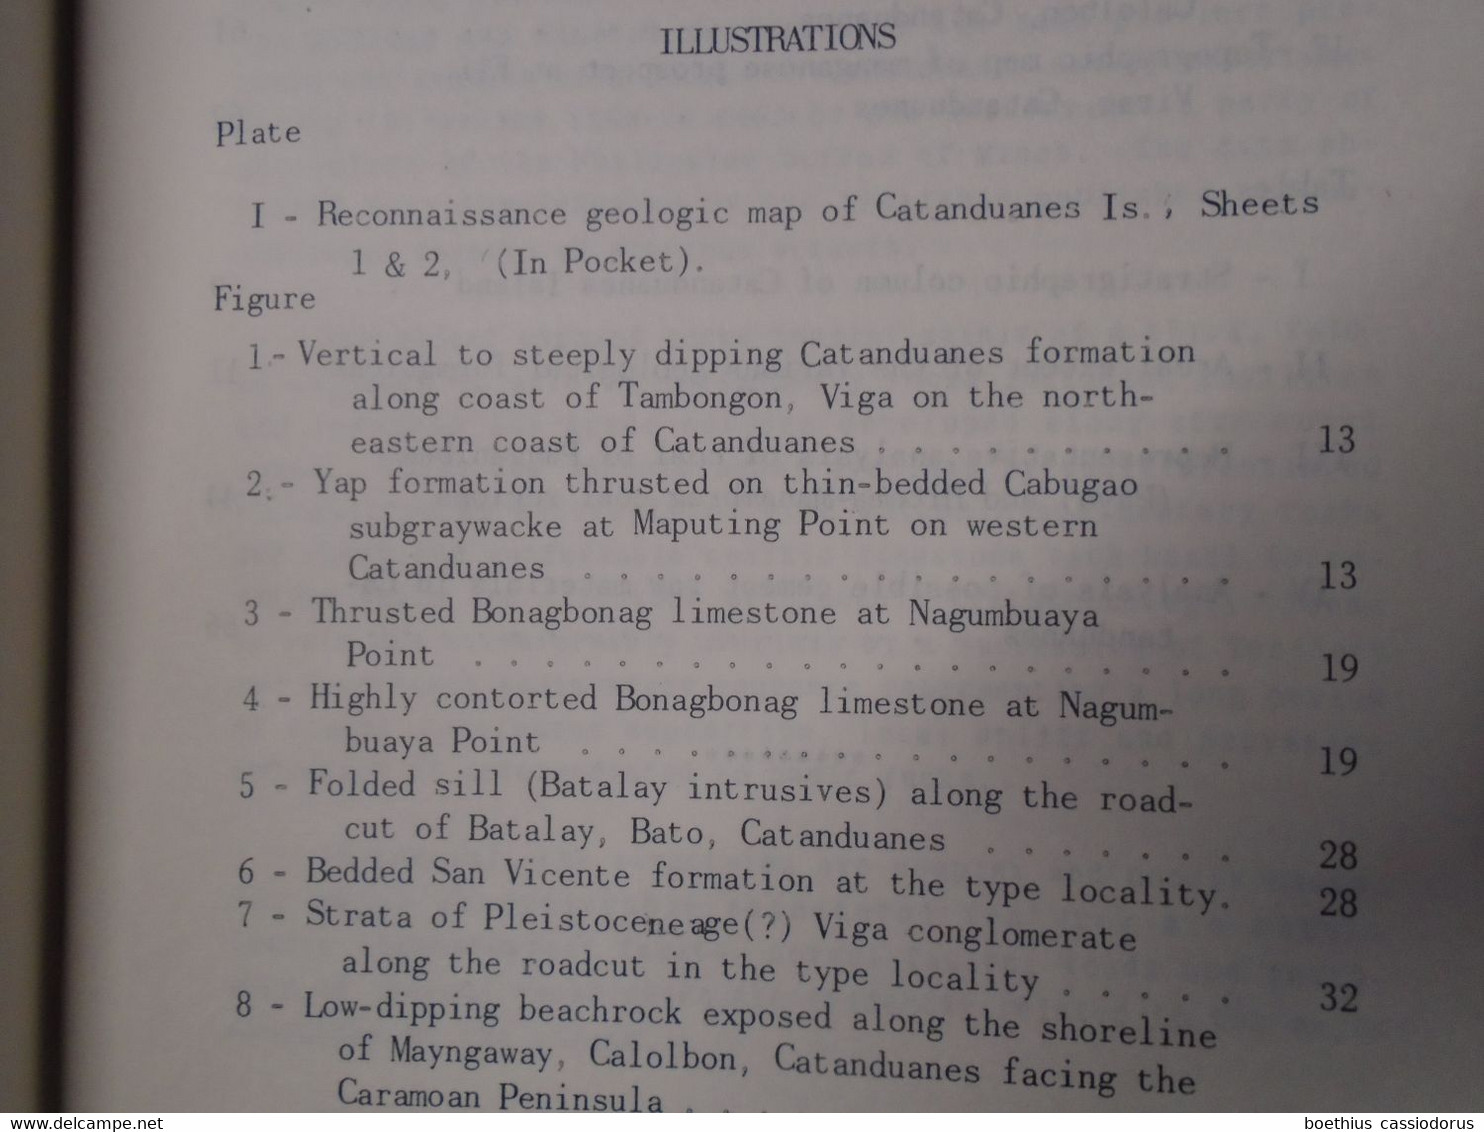 THE GEOLOGY AND MINERAL RESOURCES OF CATANDUANES PROVINCE BY FEDERICO E. MIRANDA & BASSANIO S. VARGAS 1967 PHILIPPINES